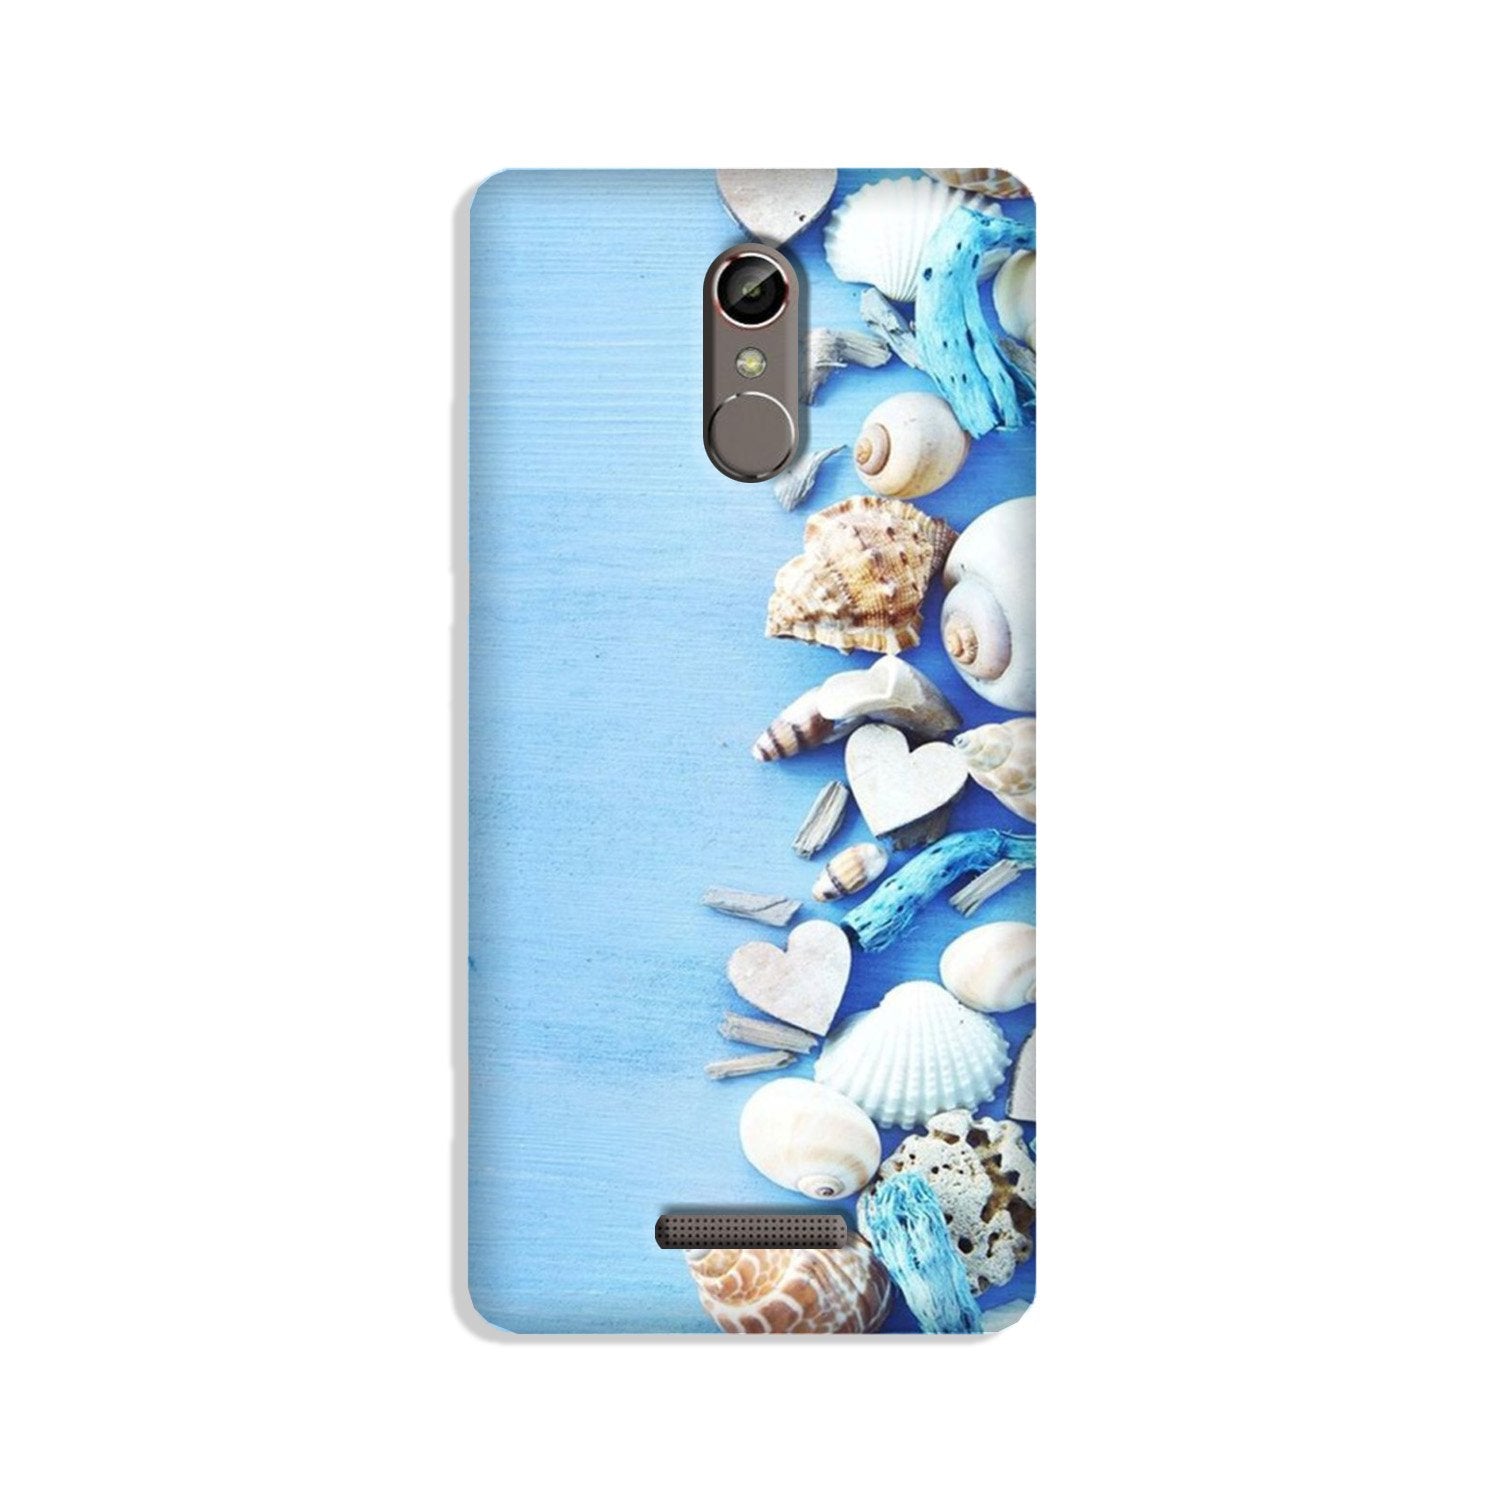 Sea Shells2 Case for Gionee S6s